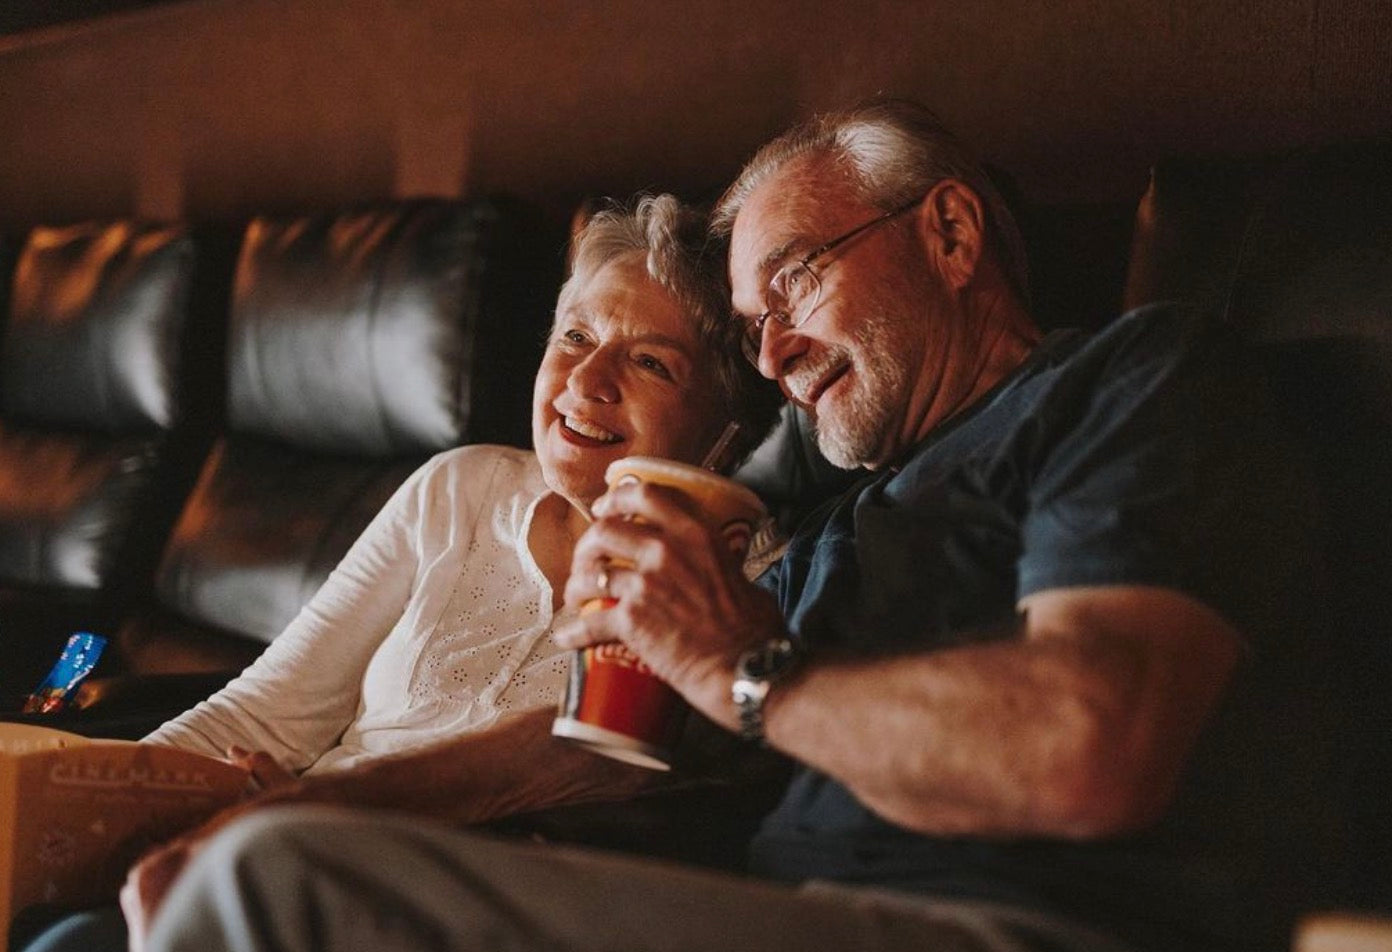 5 date ideas to celebrate national couple’s day: Elderly couple sharing smiles during their movie date.